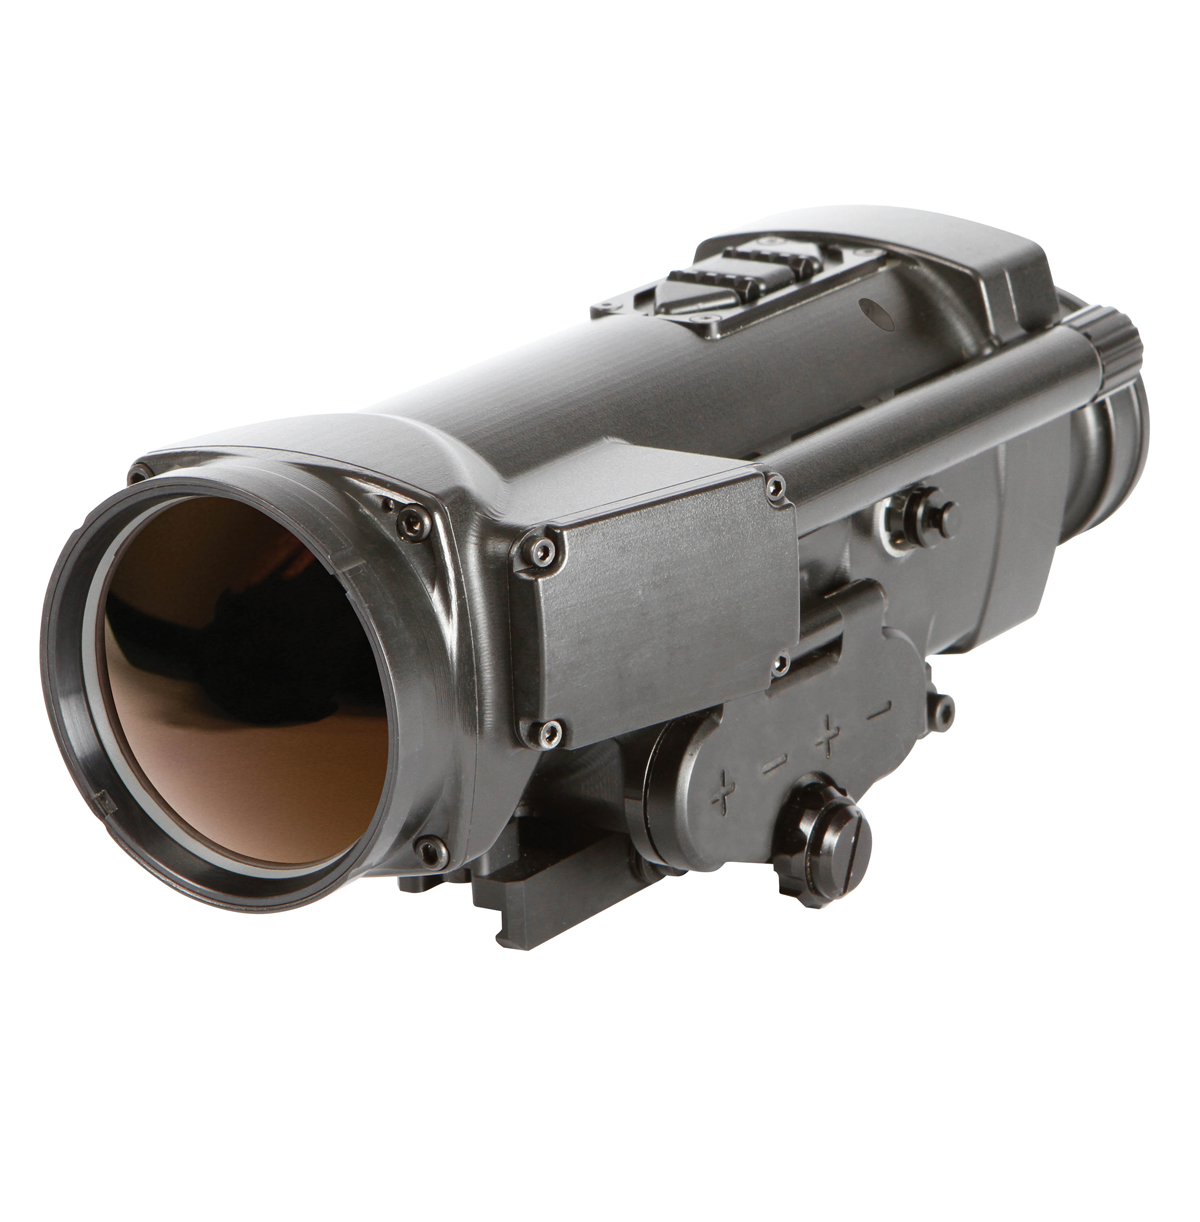 DRAGON-S Uncooled In-Line Thermal Weapon Sight